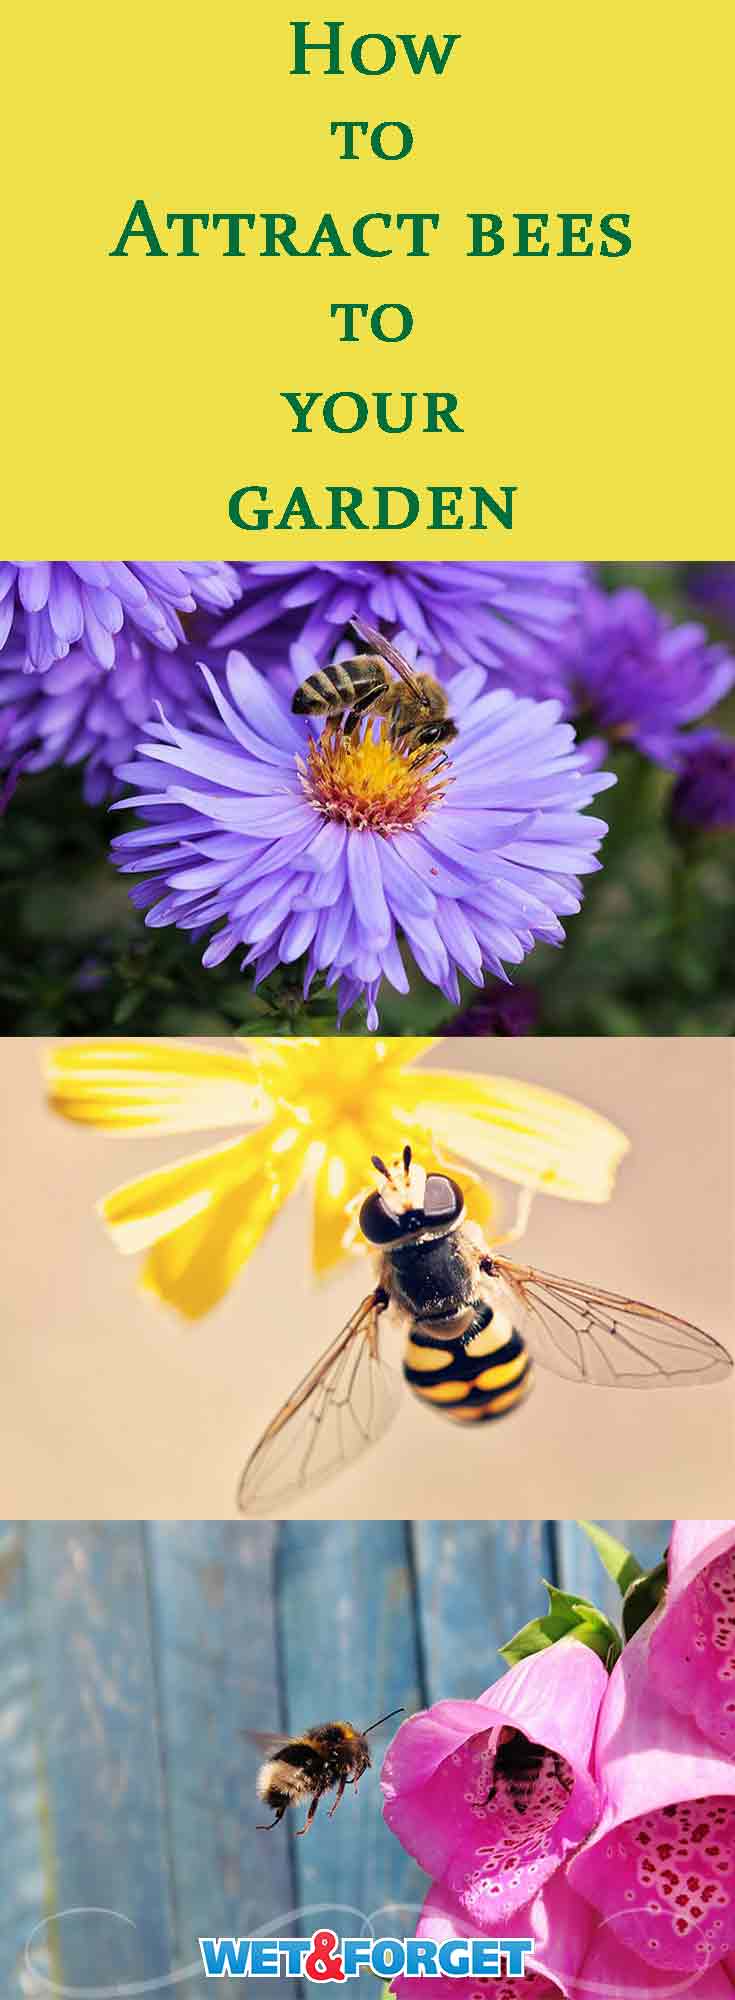 Bees are an essential part of the enviroment. They are the world's best pollinators and can help your garden grow in a variety of ways. Learn how to attract bees to your garden with these informative tips and ideas!